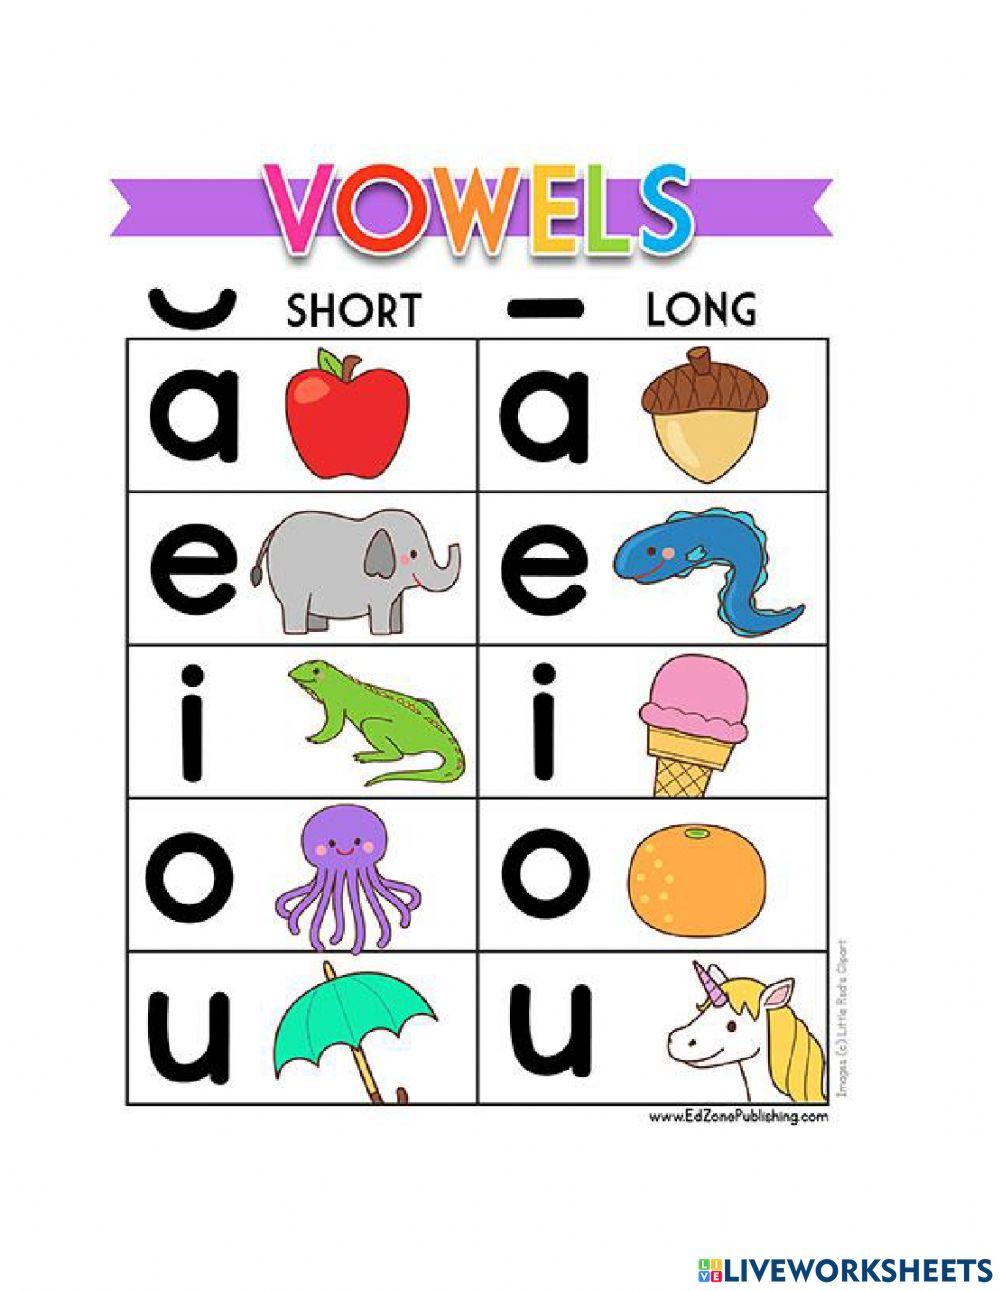 Short and Long Vowel Sounds in English